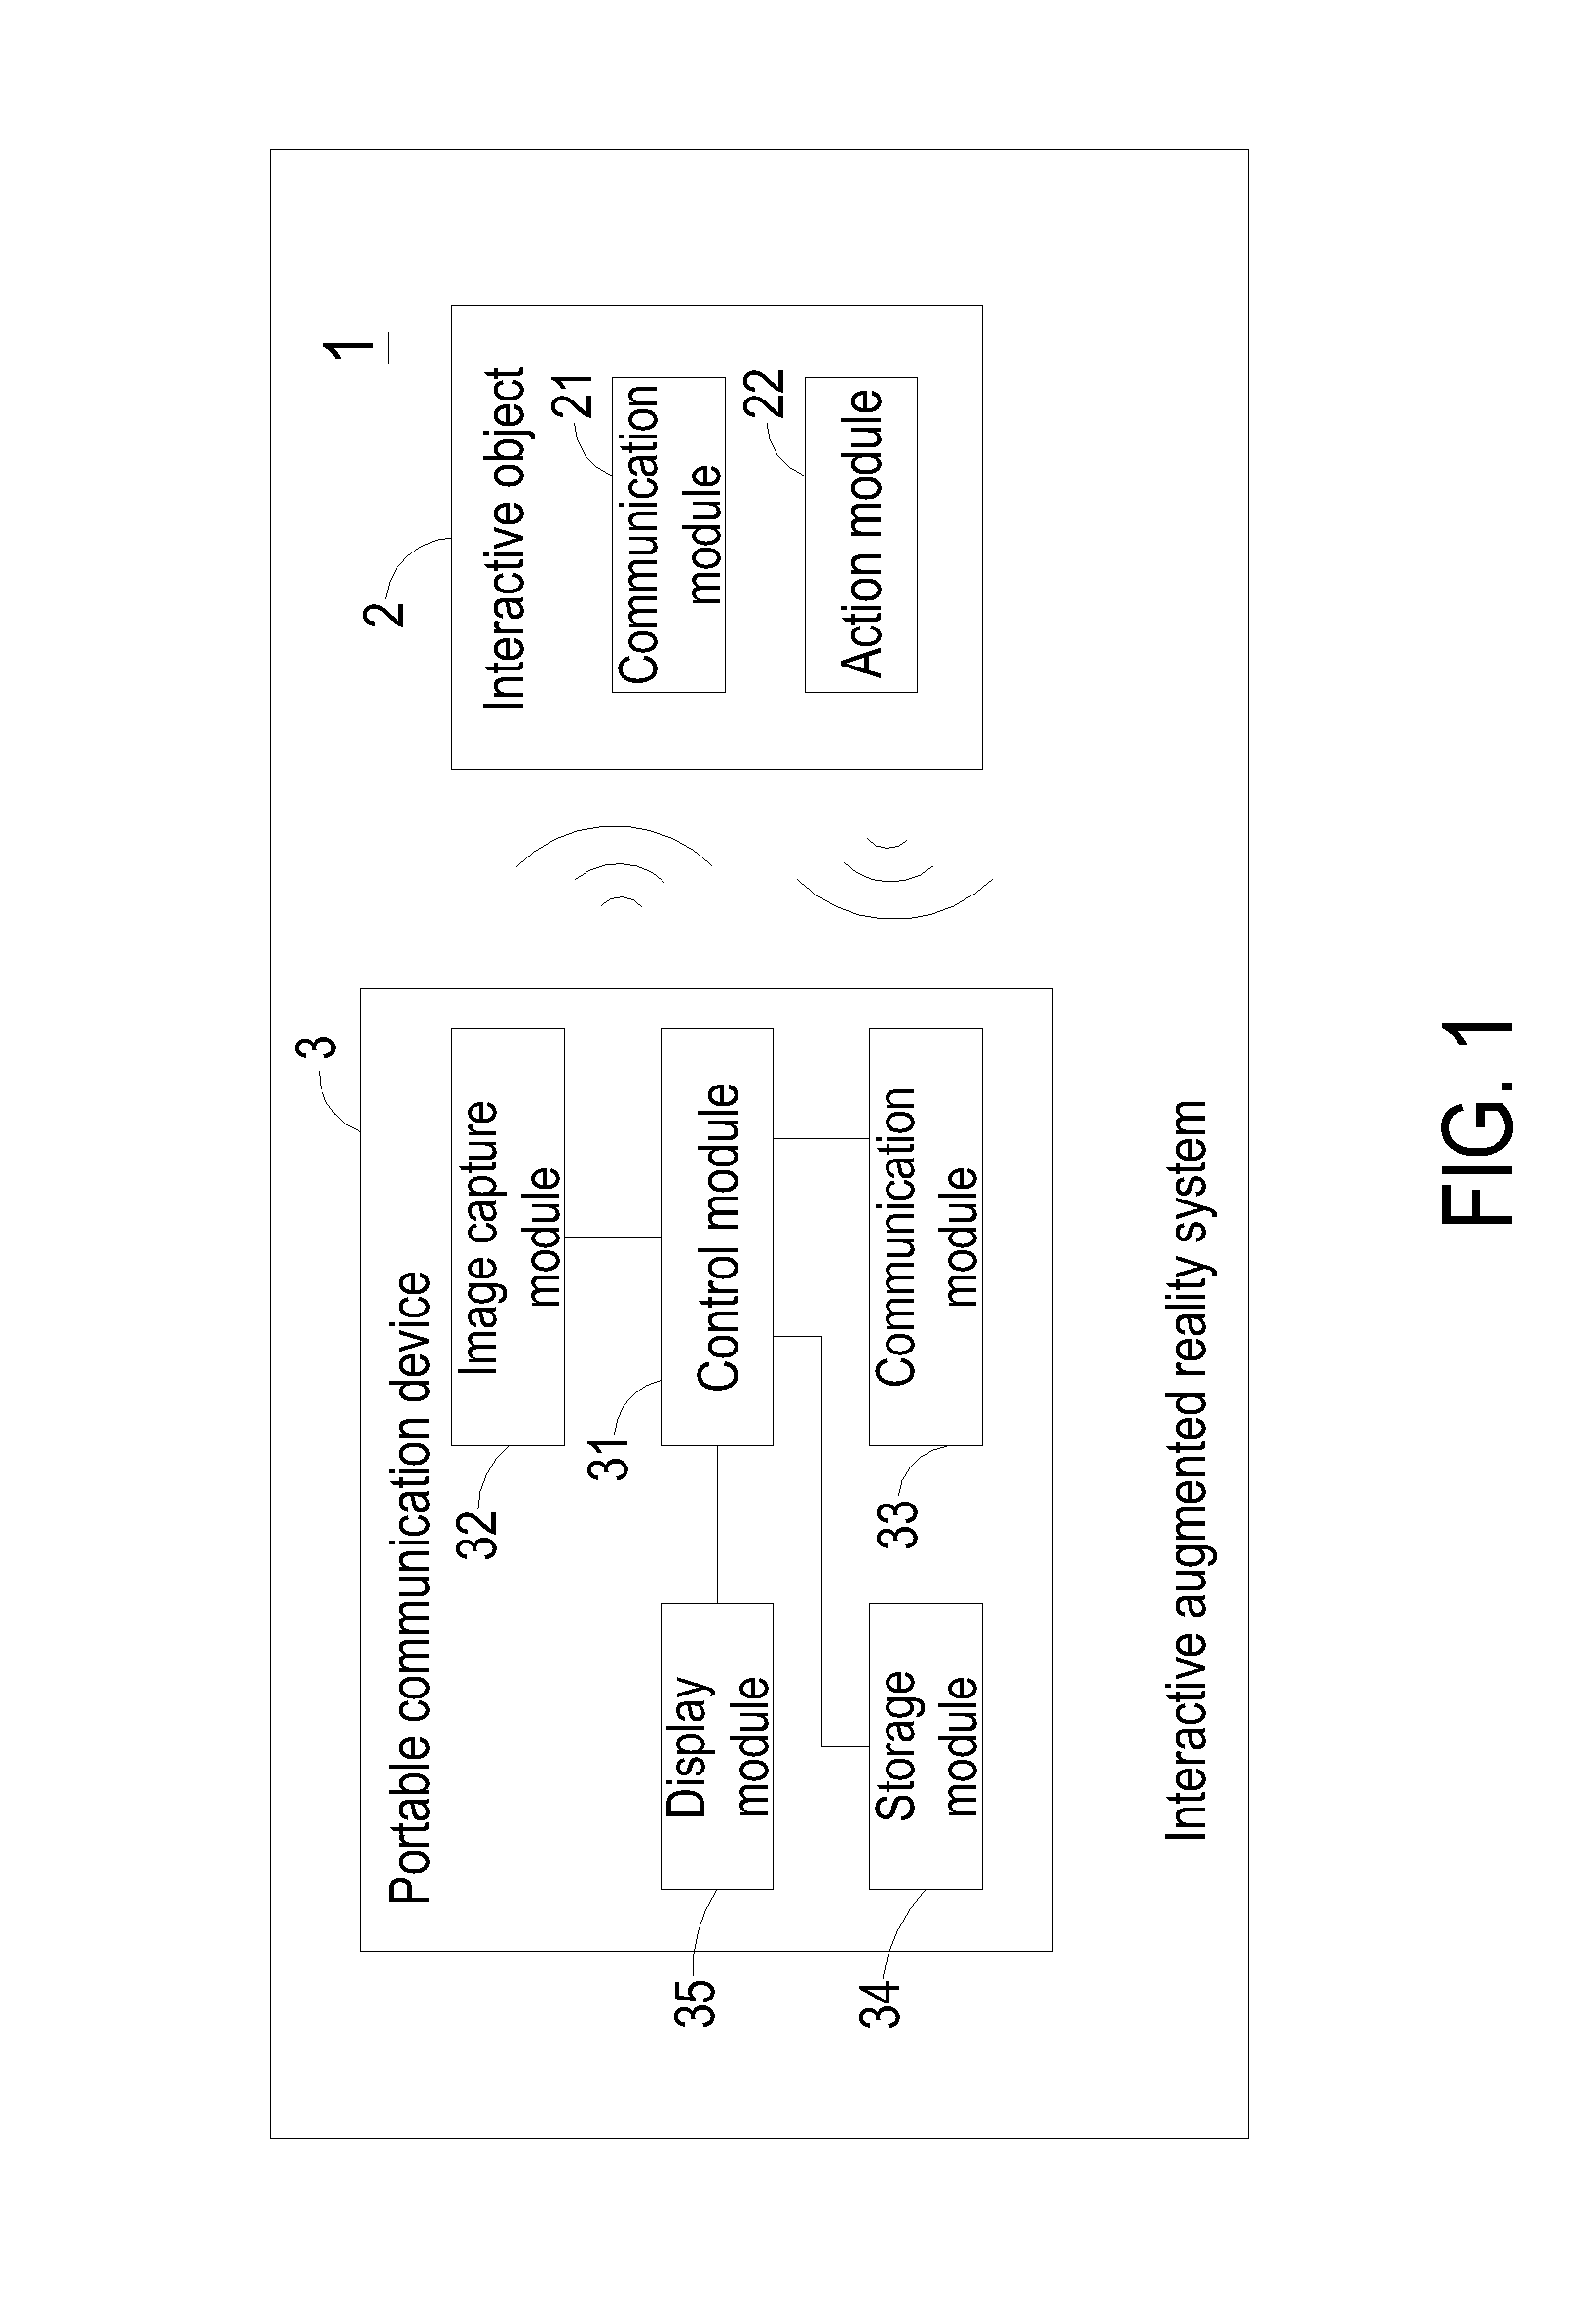 Interactive augmented reality system and portable communication device and interaction method thereof